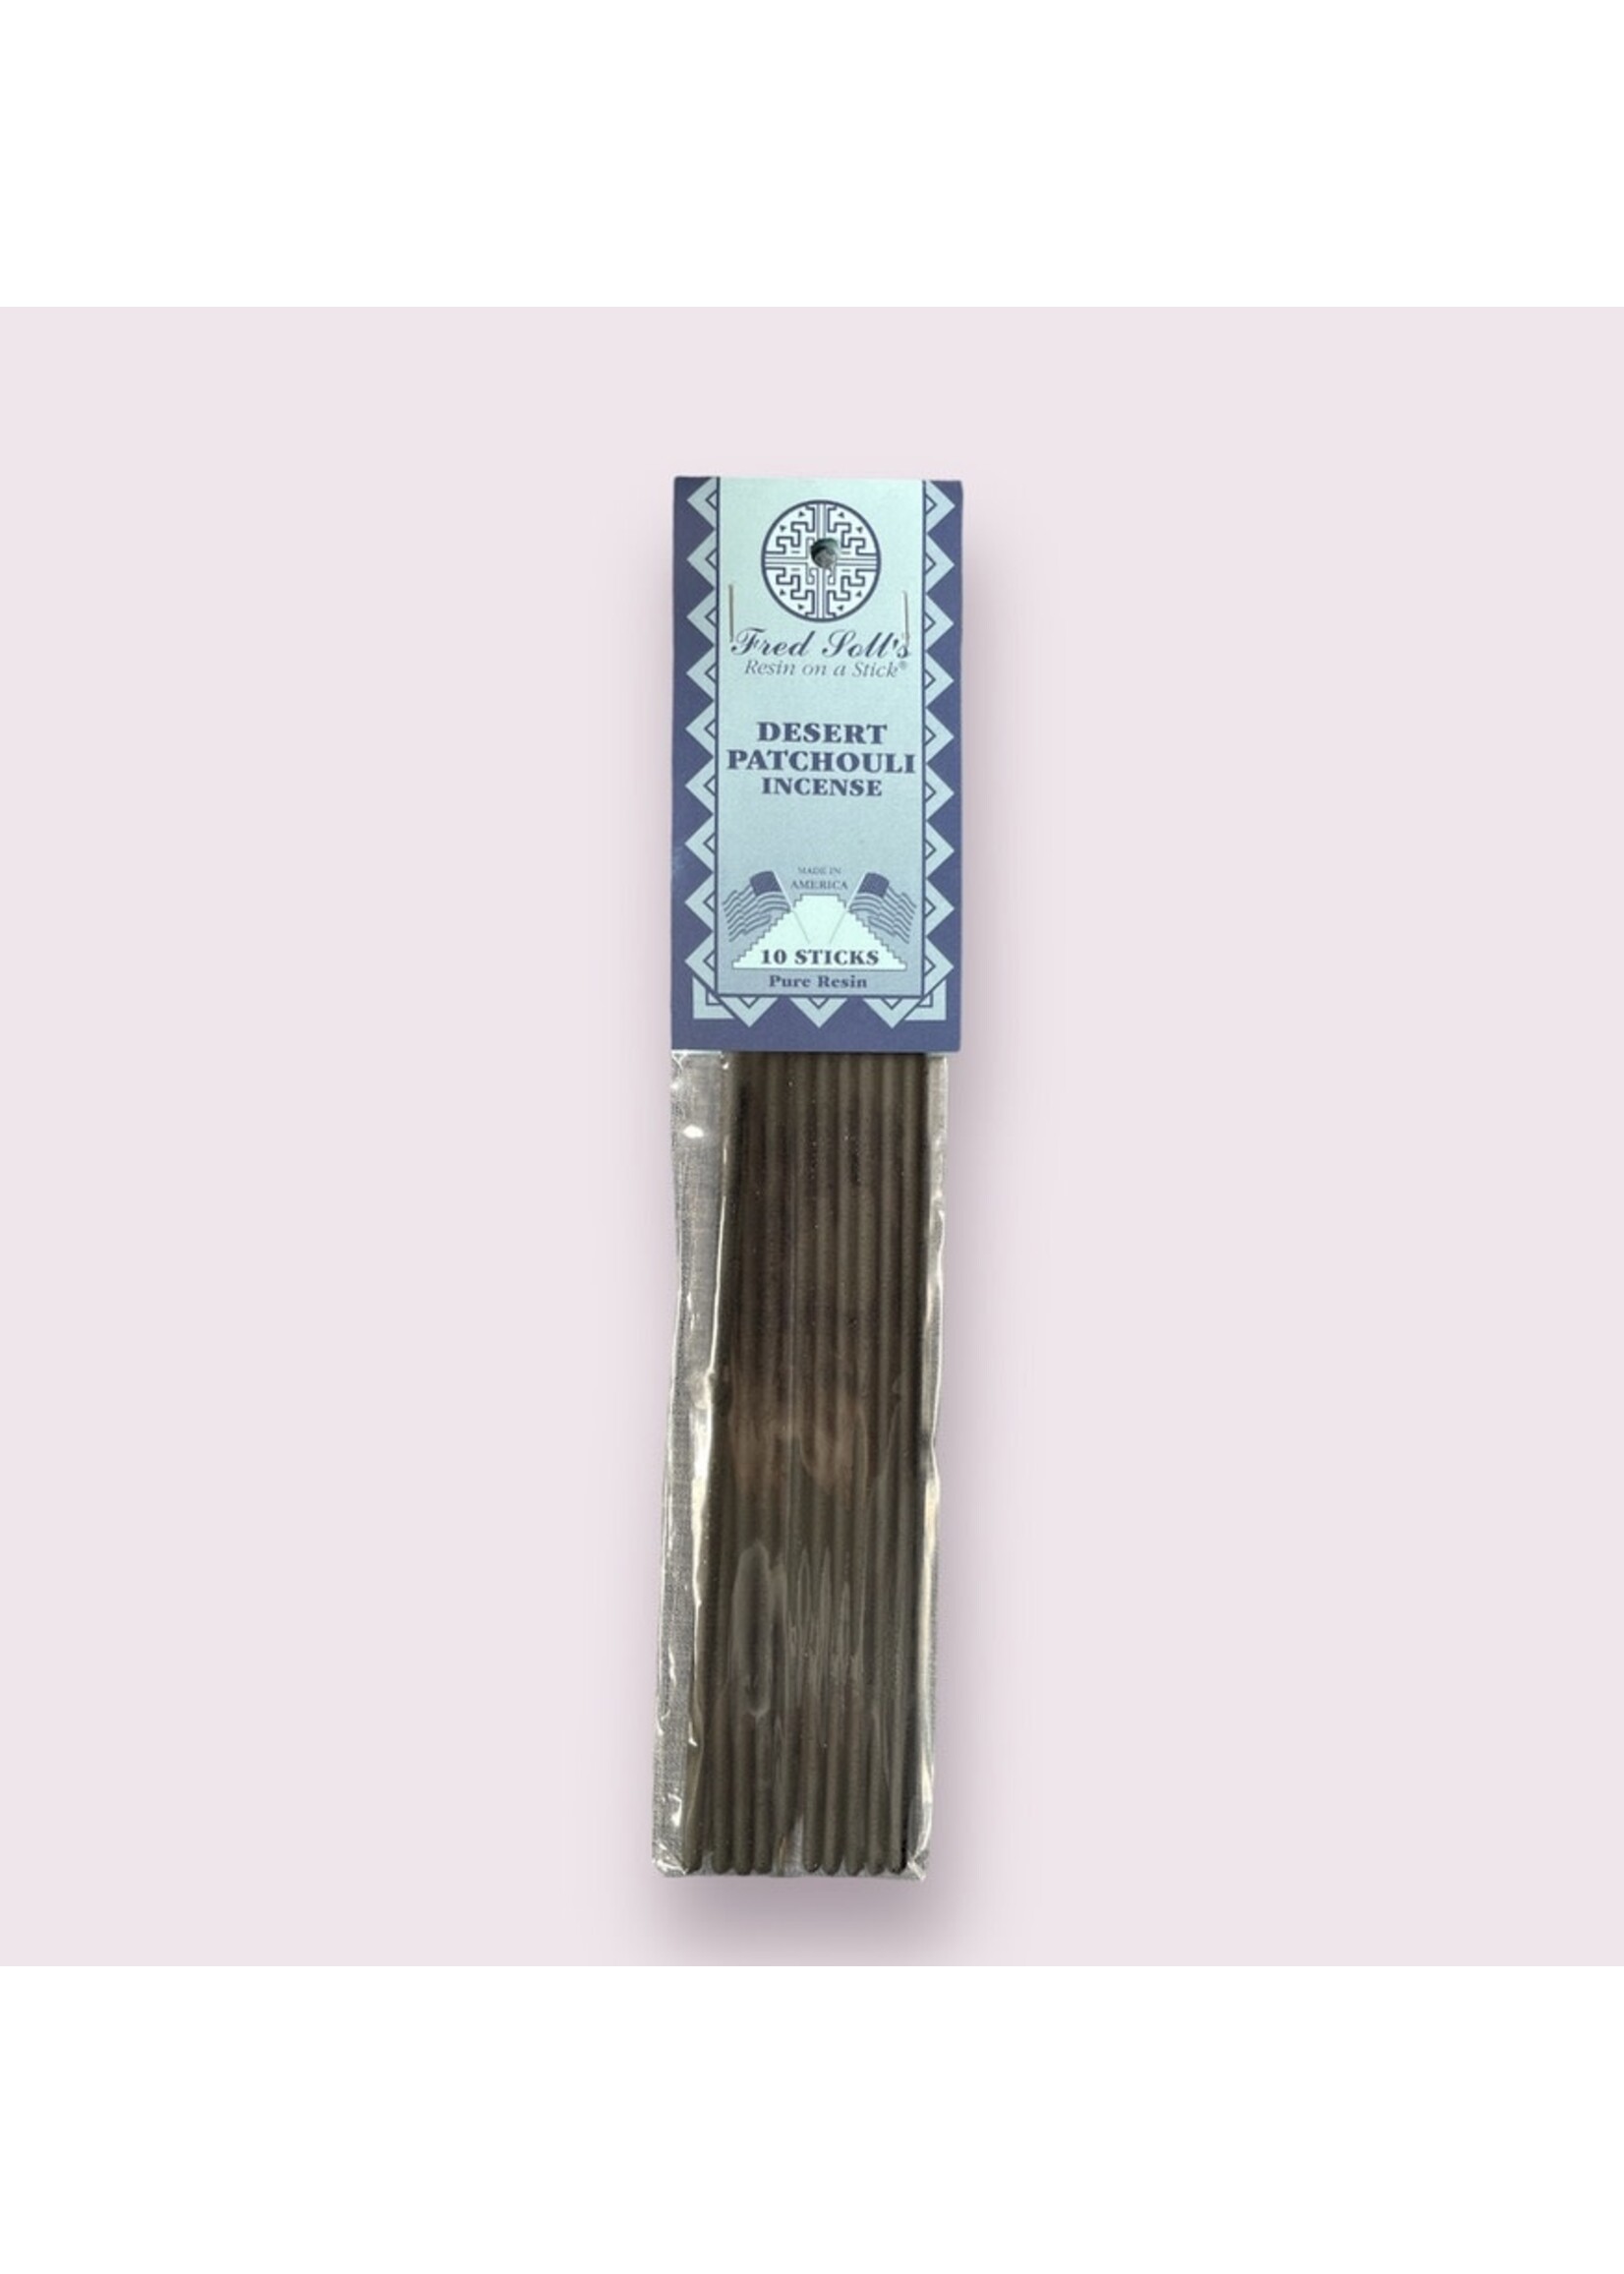 Desert Patchouli | Resin Stick Incense | Fred Soll